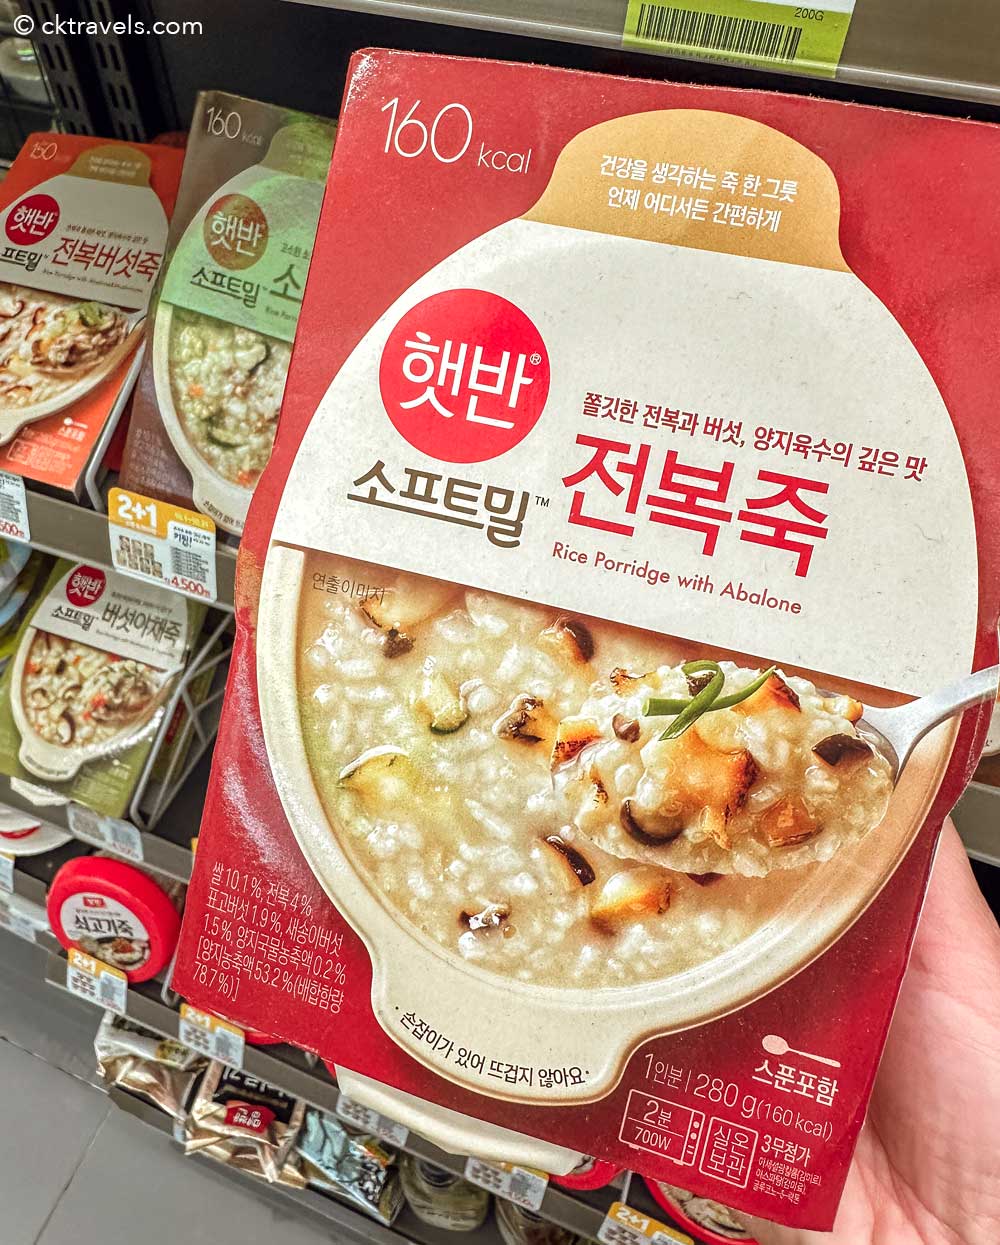 Rice porridge with abalone from CU convenience stores in South Korea